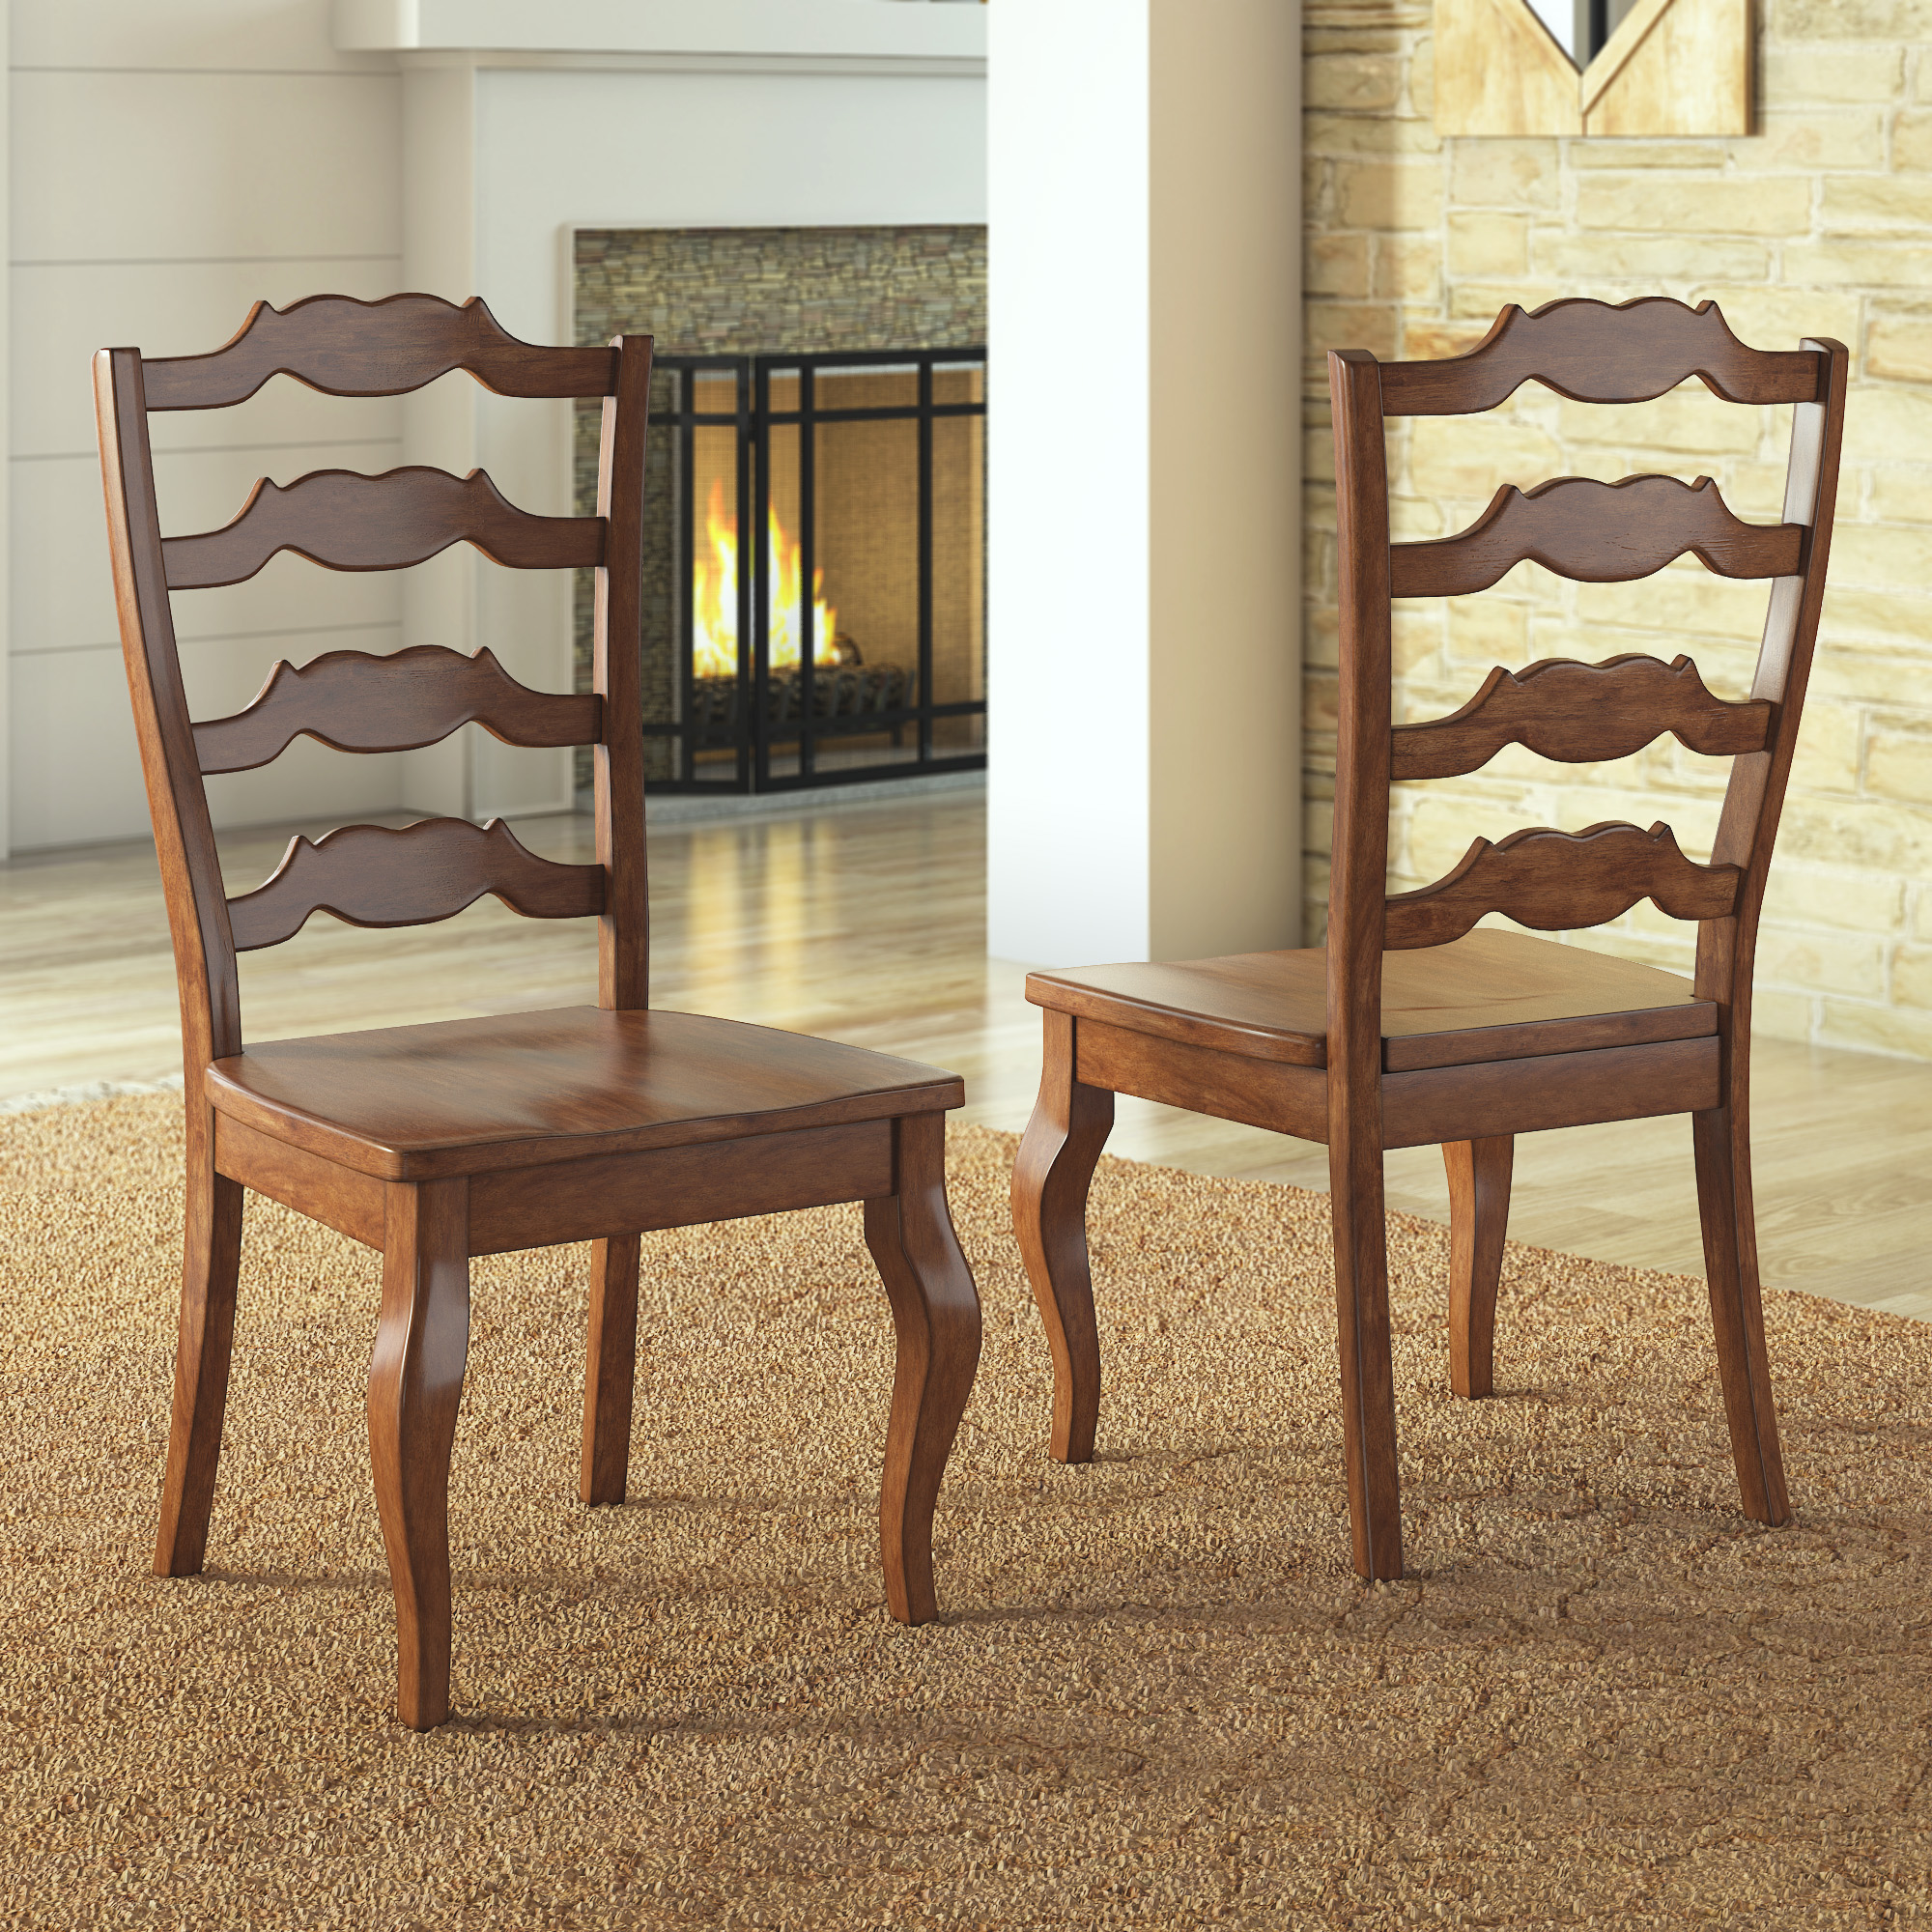 Cabriole is one of the more little-known furniture terms to know. Pictured are the French Ladder Back Wood Dining Chairs (Set of 2) in an oak finish by iNSPIRE Q Classic. The two front legs of the dining chairs have the cabriole style, with the gentle S-shaped curves.